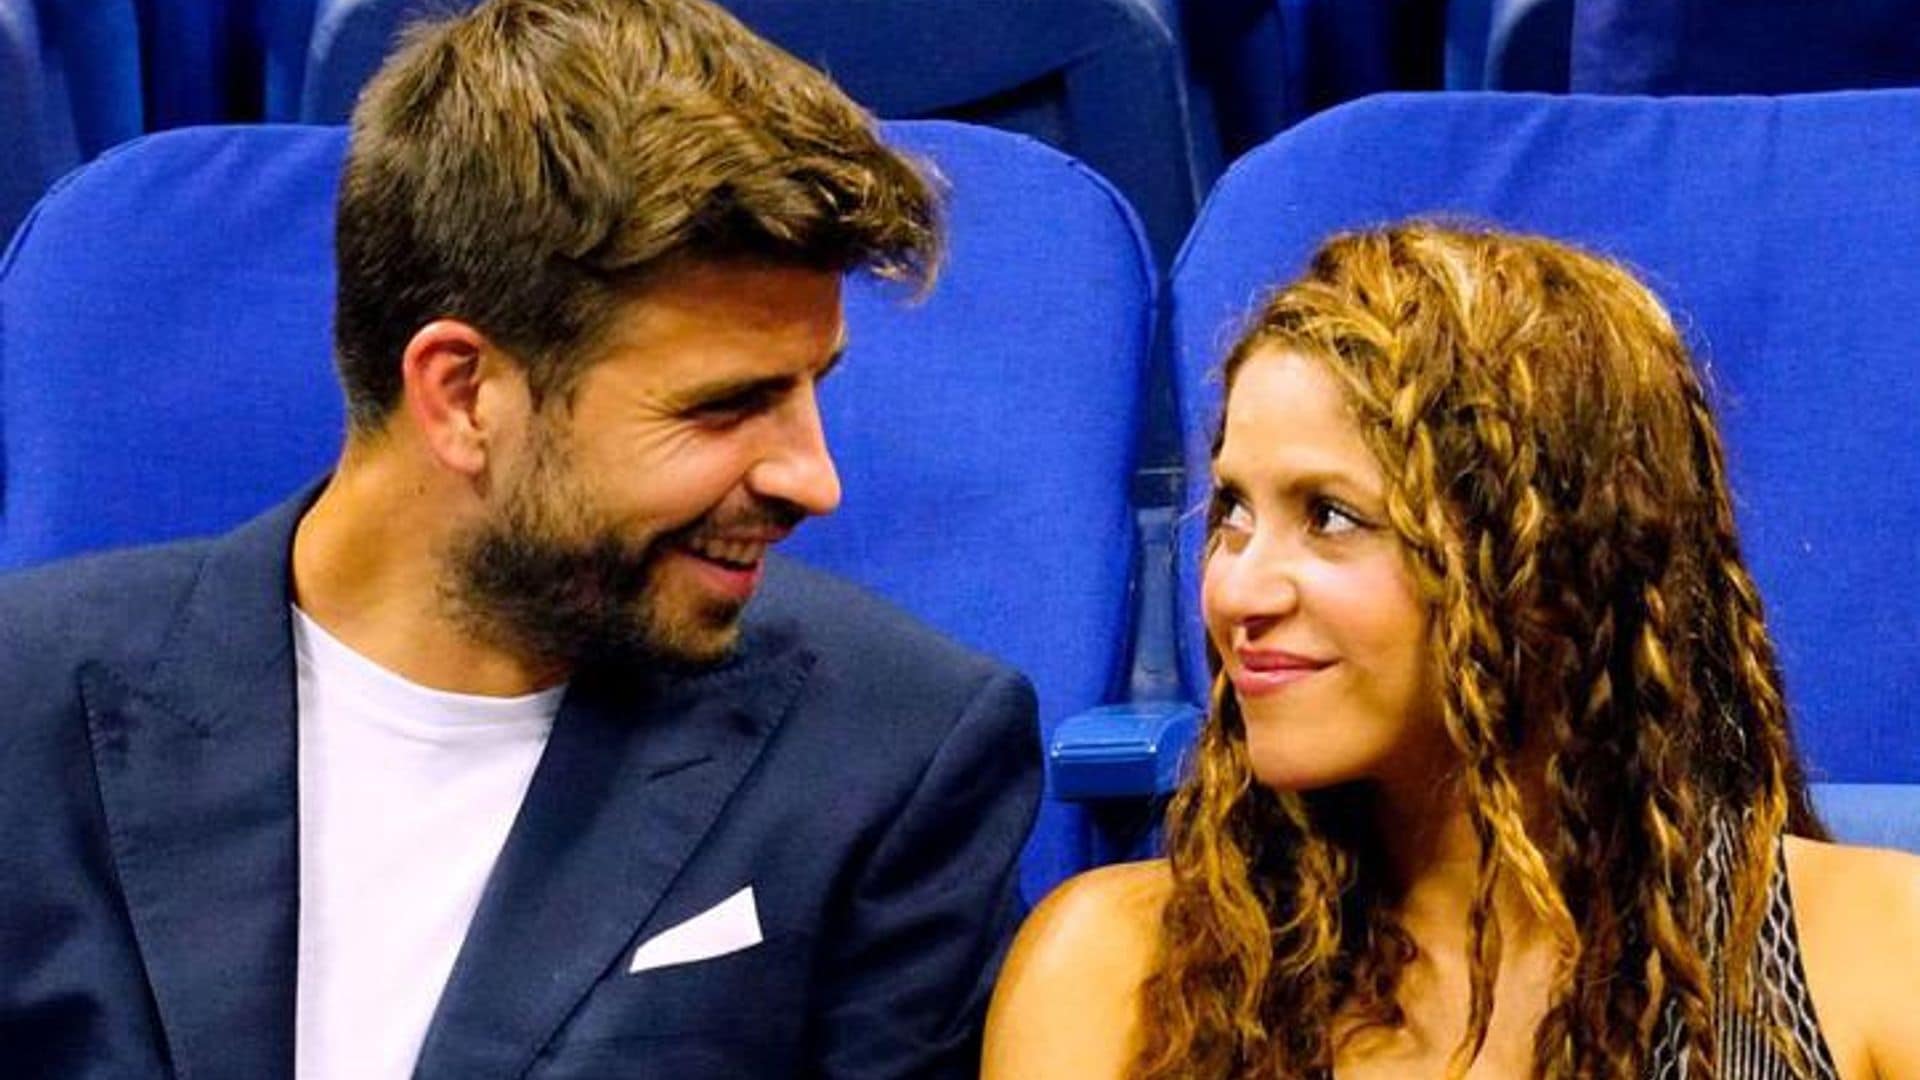 Shakira and Gerard Piqué enjoy a tennis date at the US Open